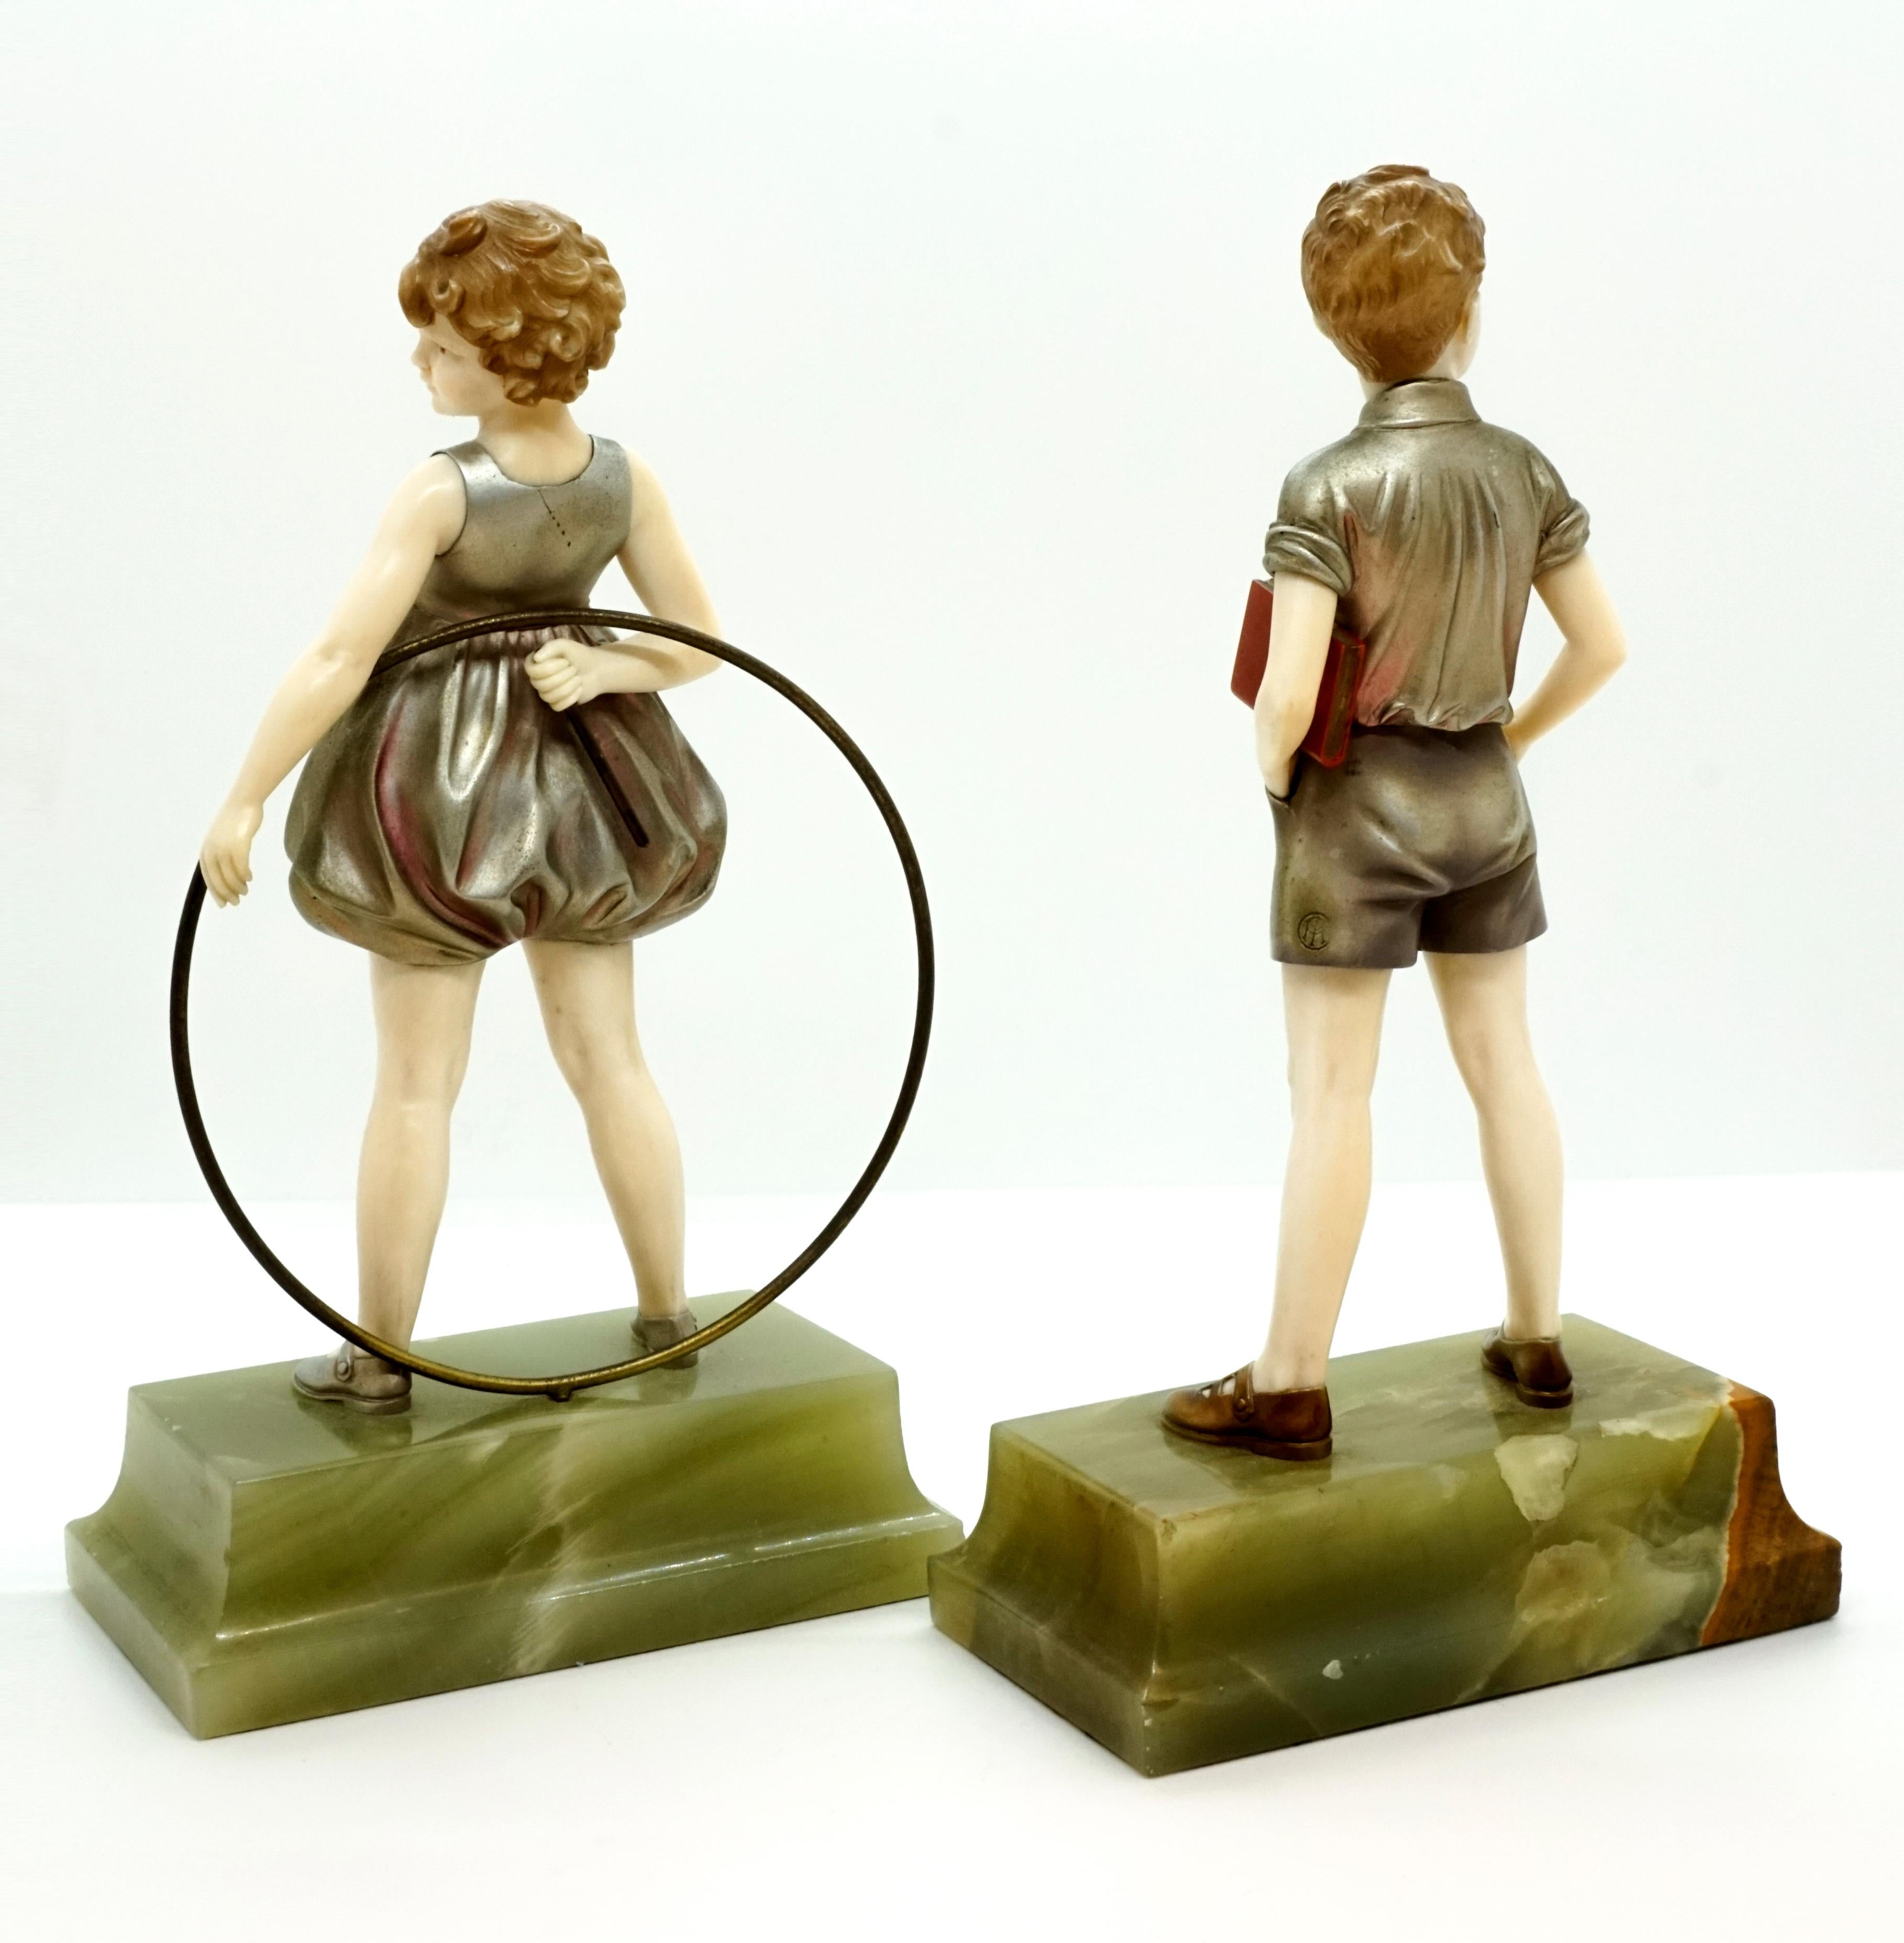 Hand-Carved Pair of Art Deco Child Figurines 'Hoop Girl' & 'Sunny Boy' by Ferdinand Preiss